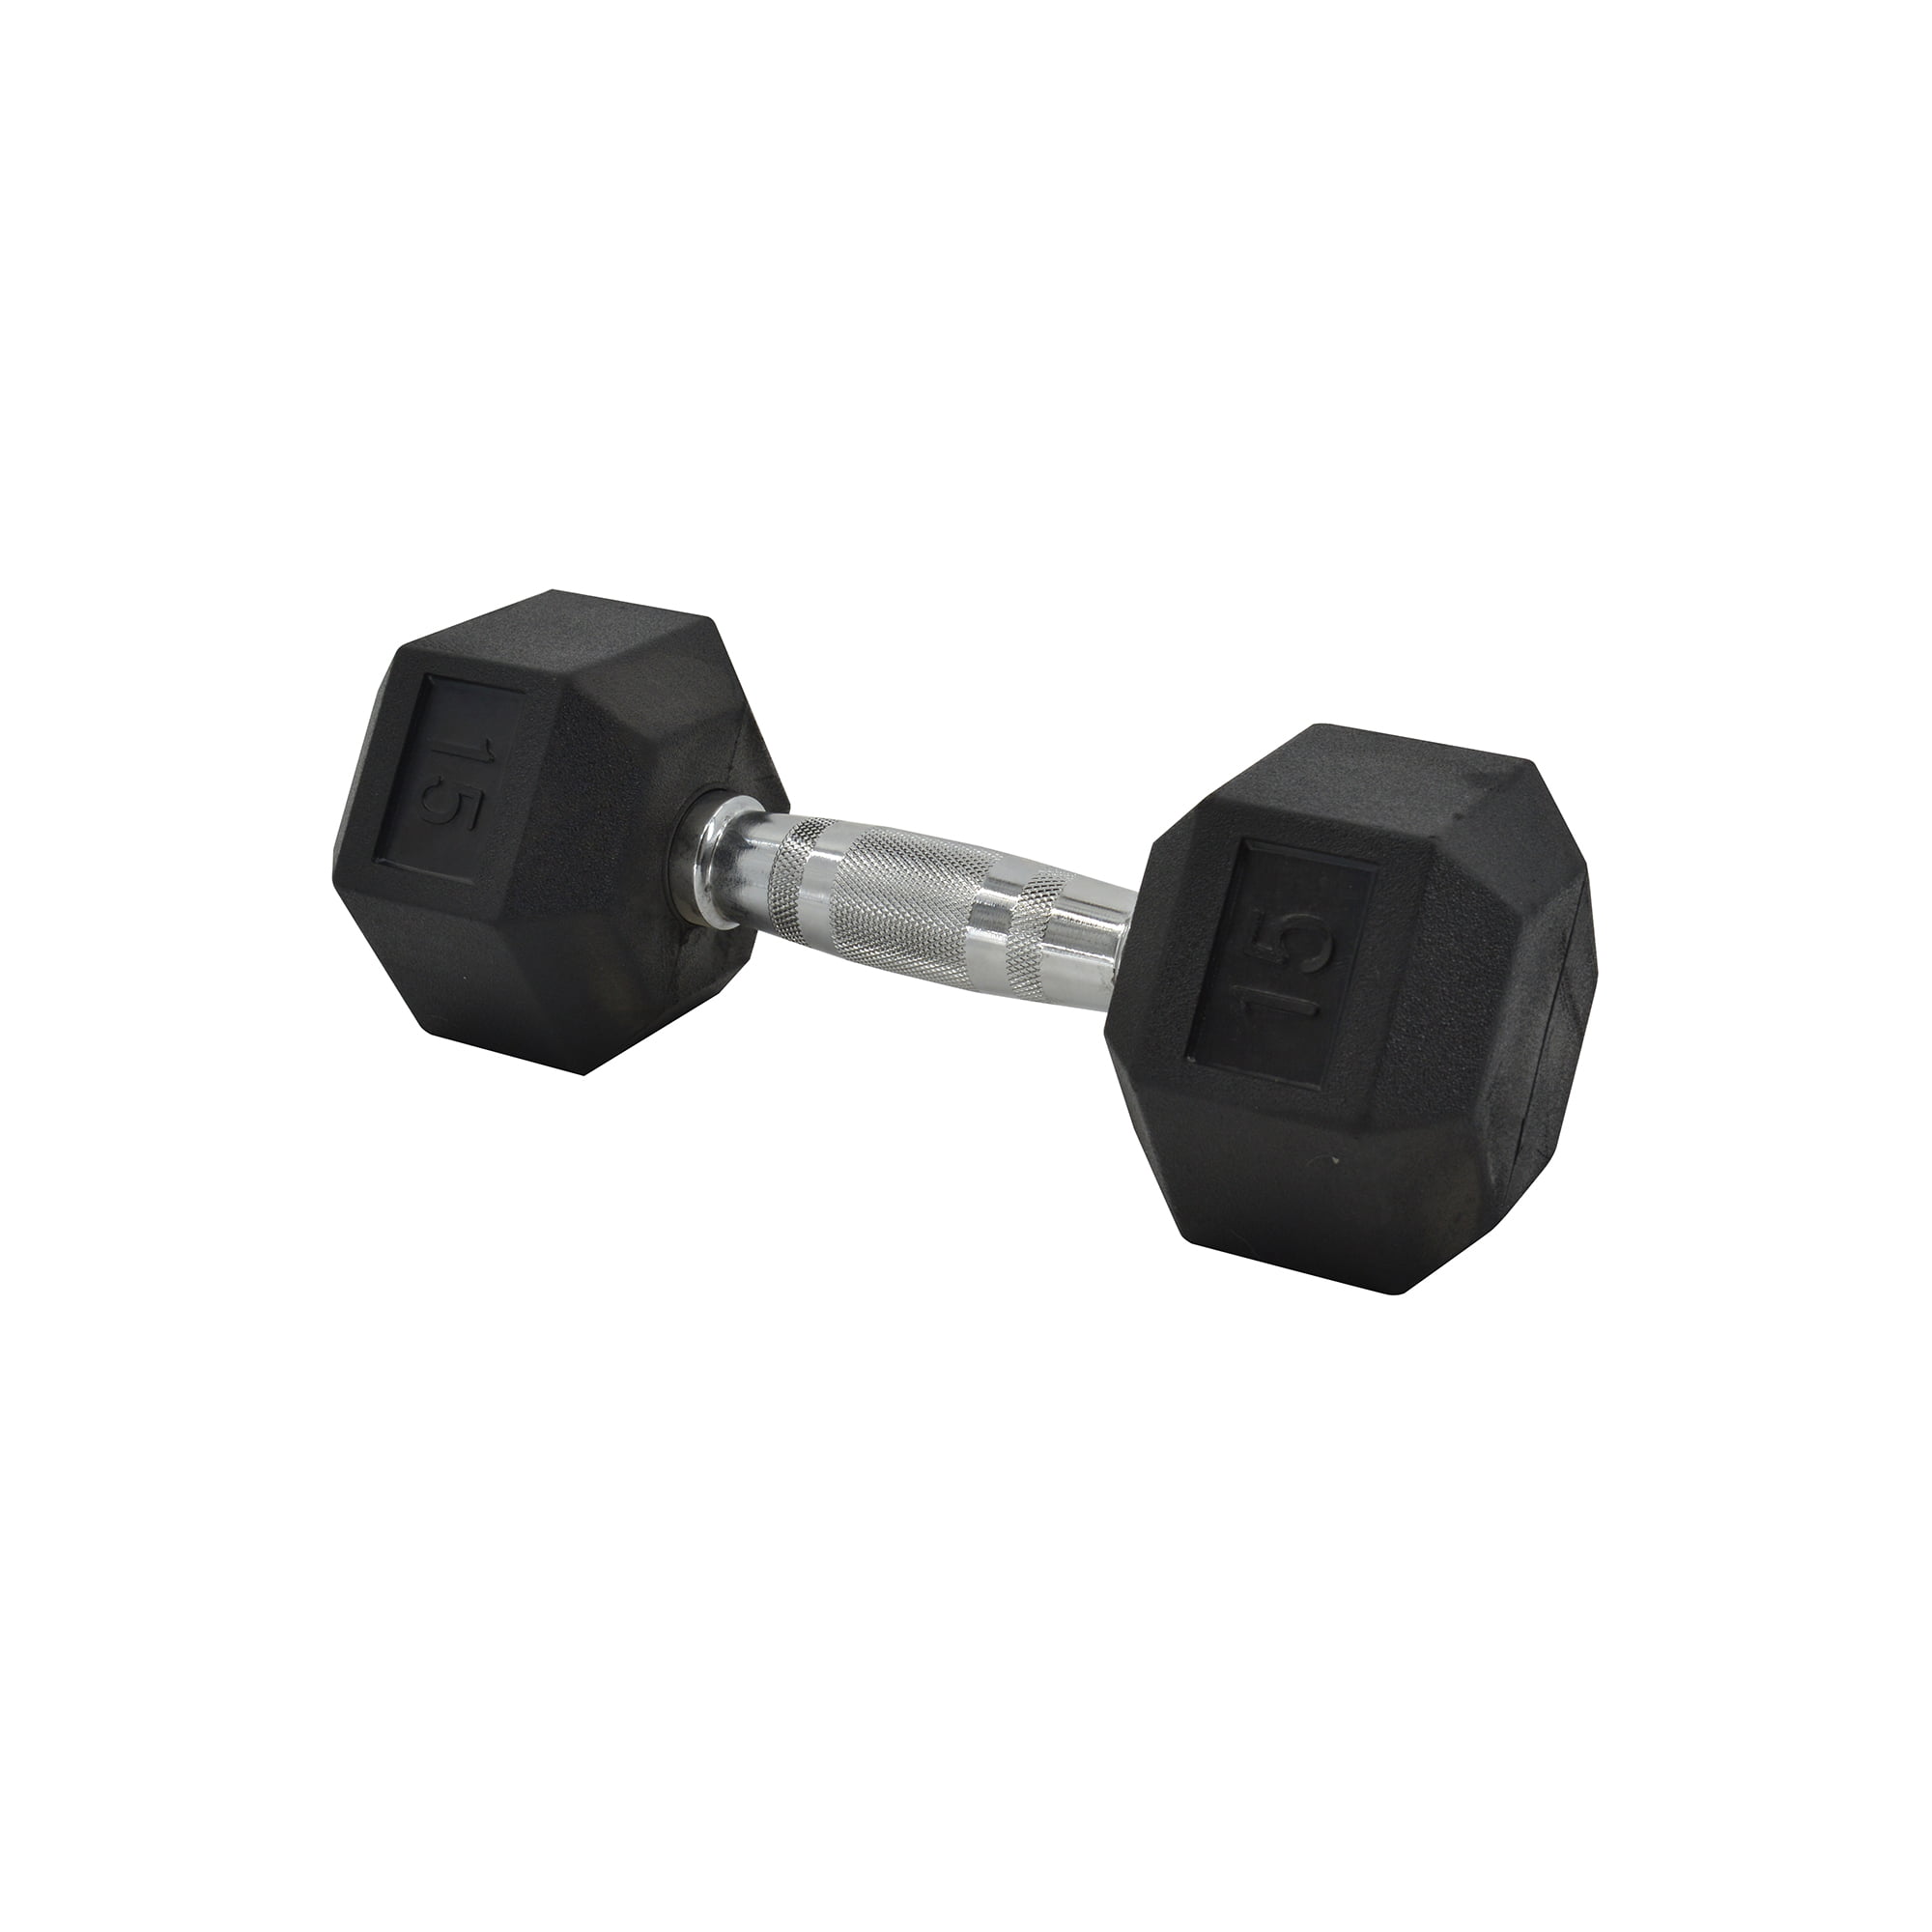 Rubber Coated Hex Dumbbell Hand Weights 5/10/20/30/50 Pound Pair Single 